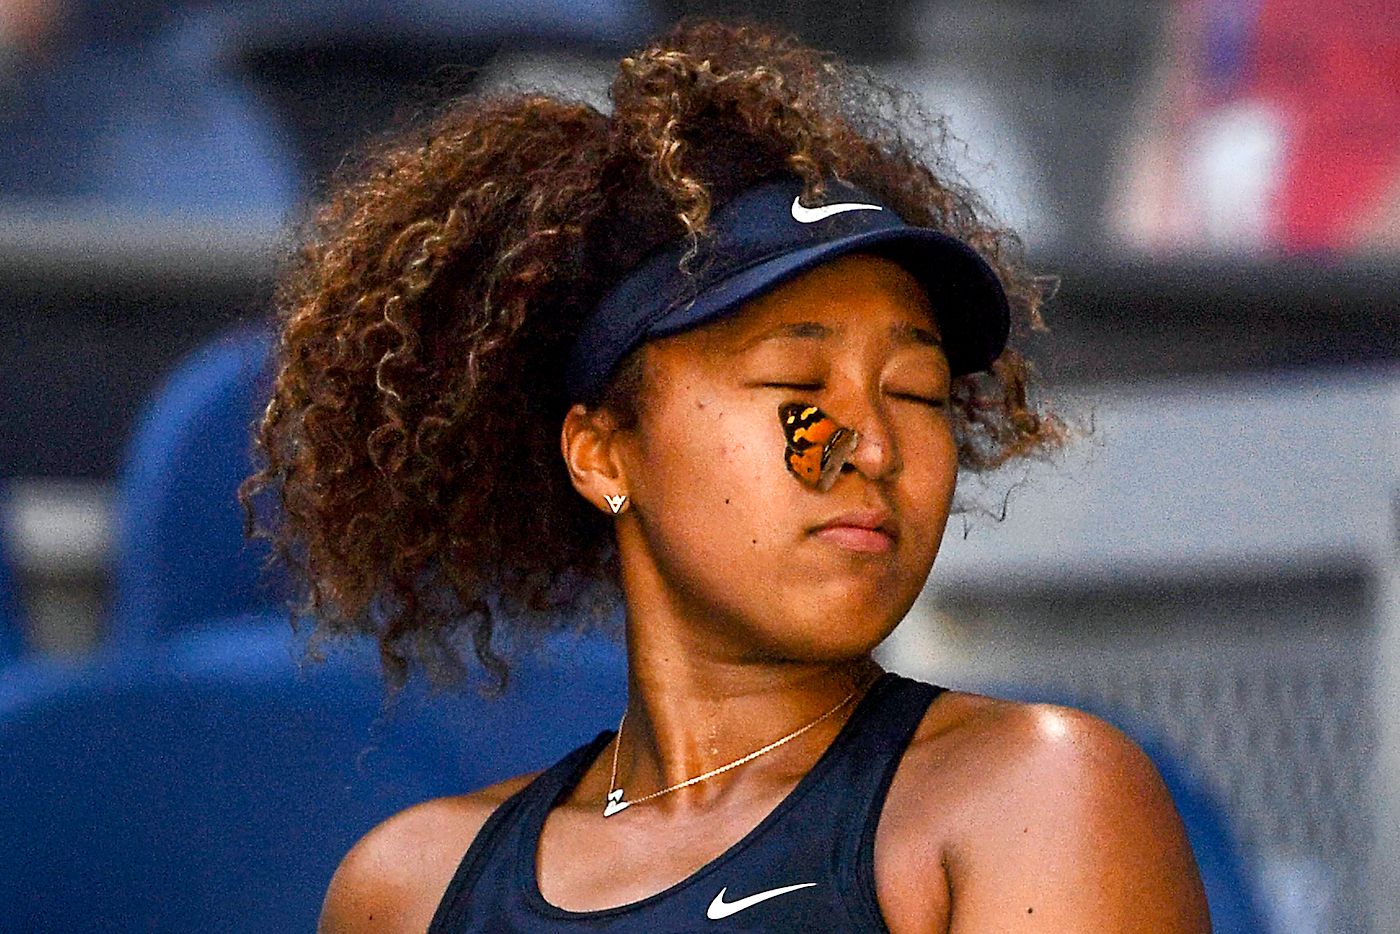 When a fan yelled out to @naomi.osaka that a butterfly was on her